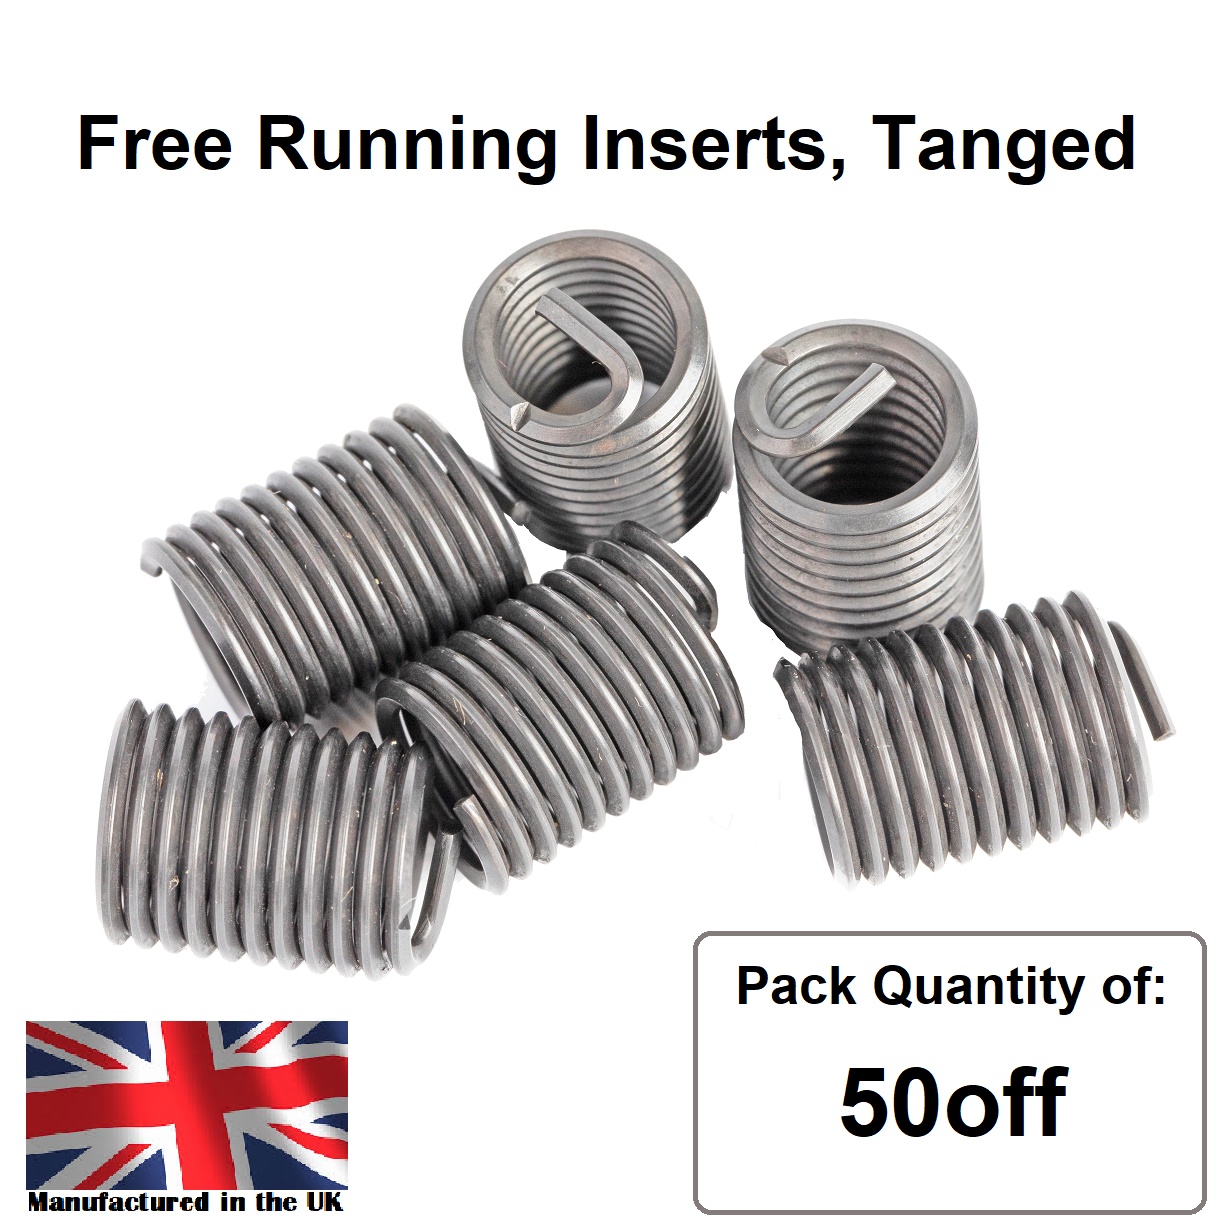 M8 x 1.0 x 2D Metric Fine, Free Running, Tanged, Wire Thread Repair Insert, 304/A2 Stainless (Pack 50)